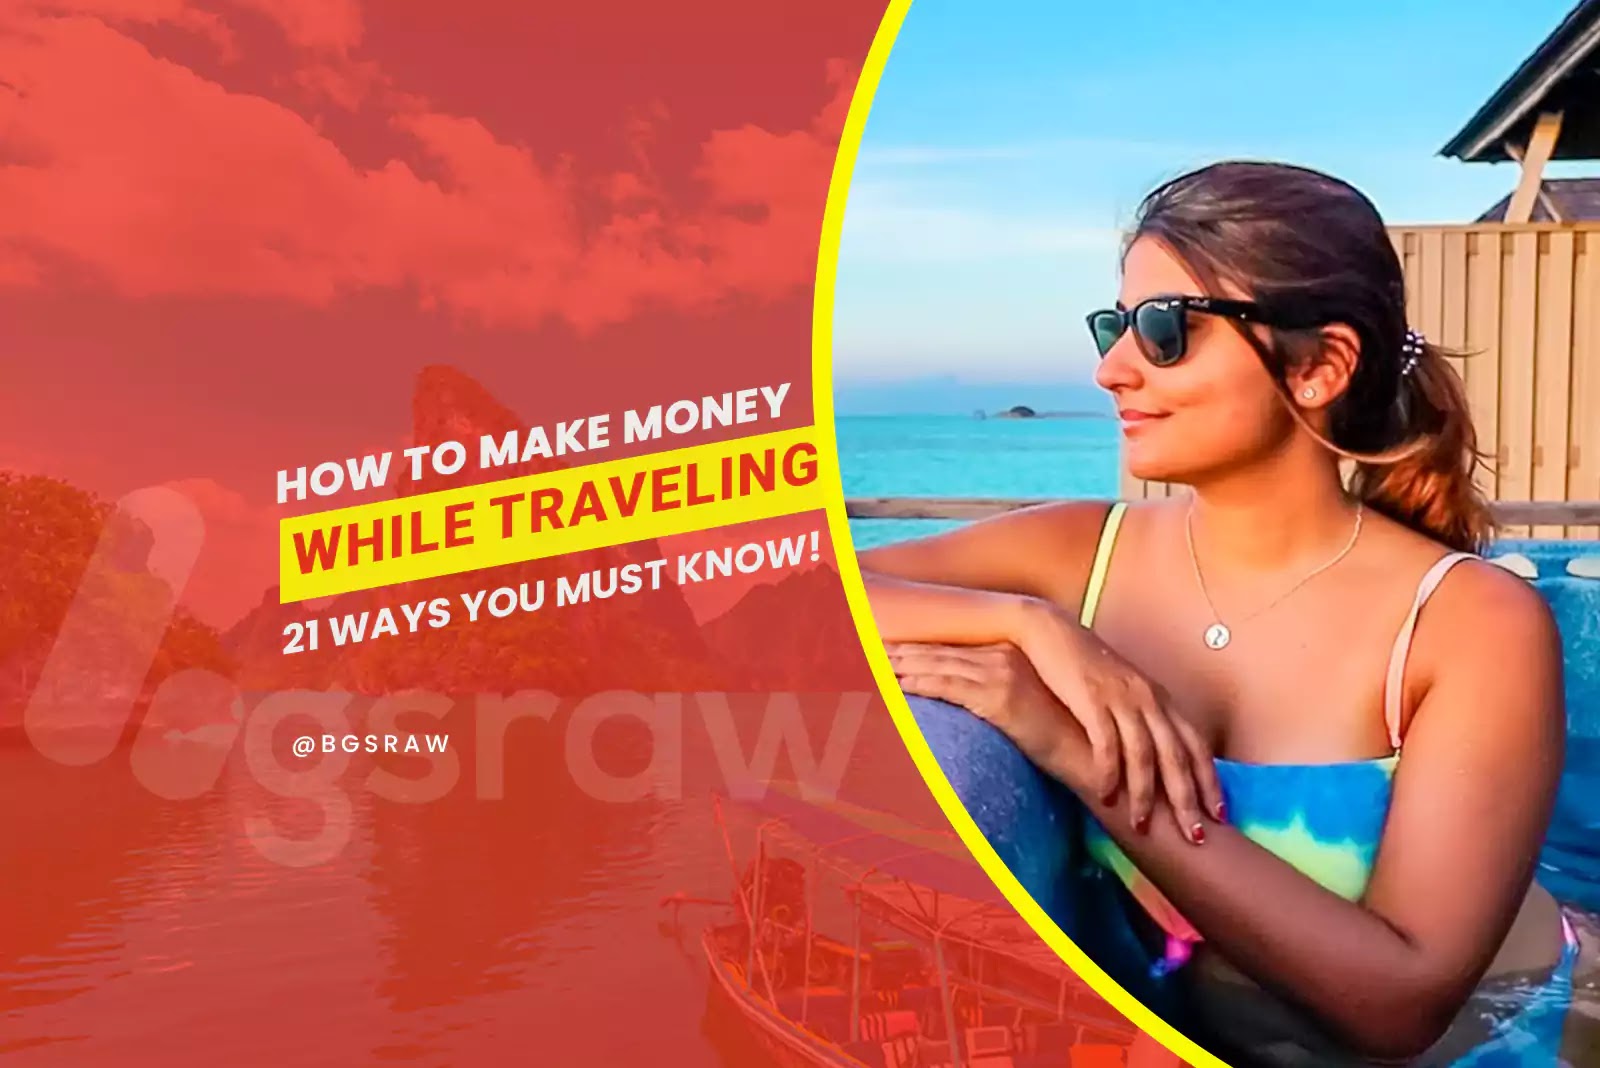 How to Make Money While Traveling, 21 Ways You Must Know! Earn money like Kritika Goel Best Indian Travel Vlogger